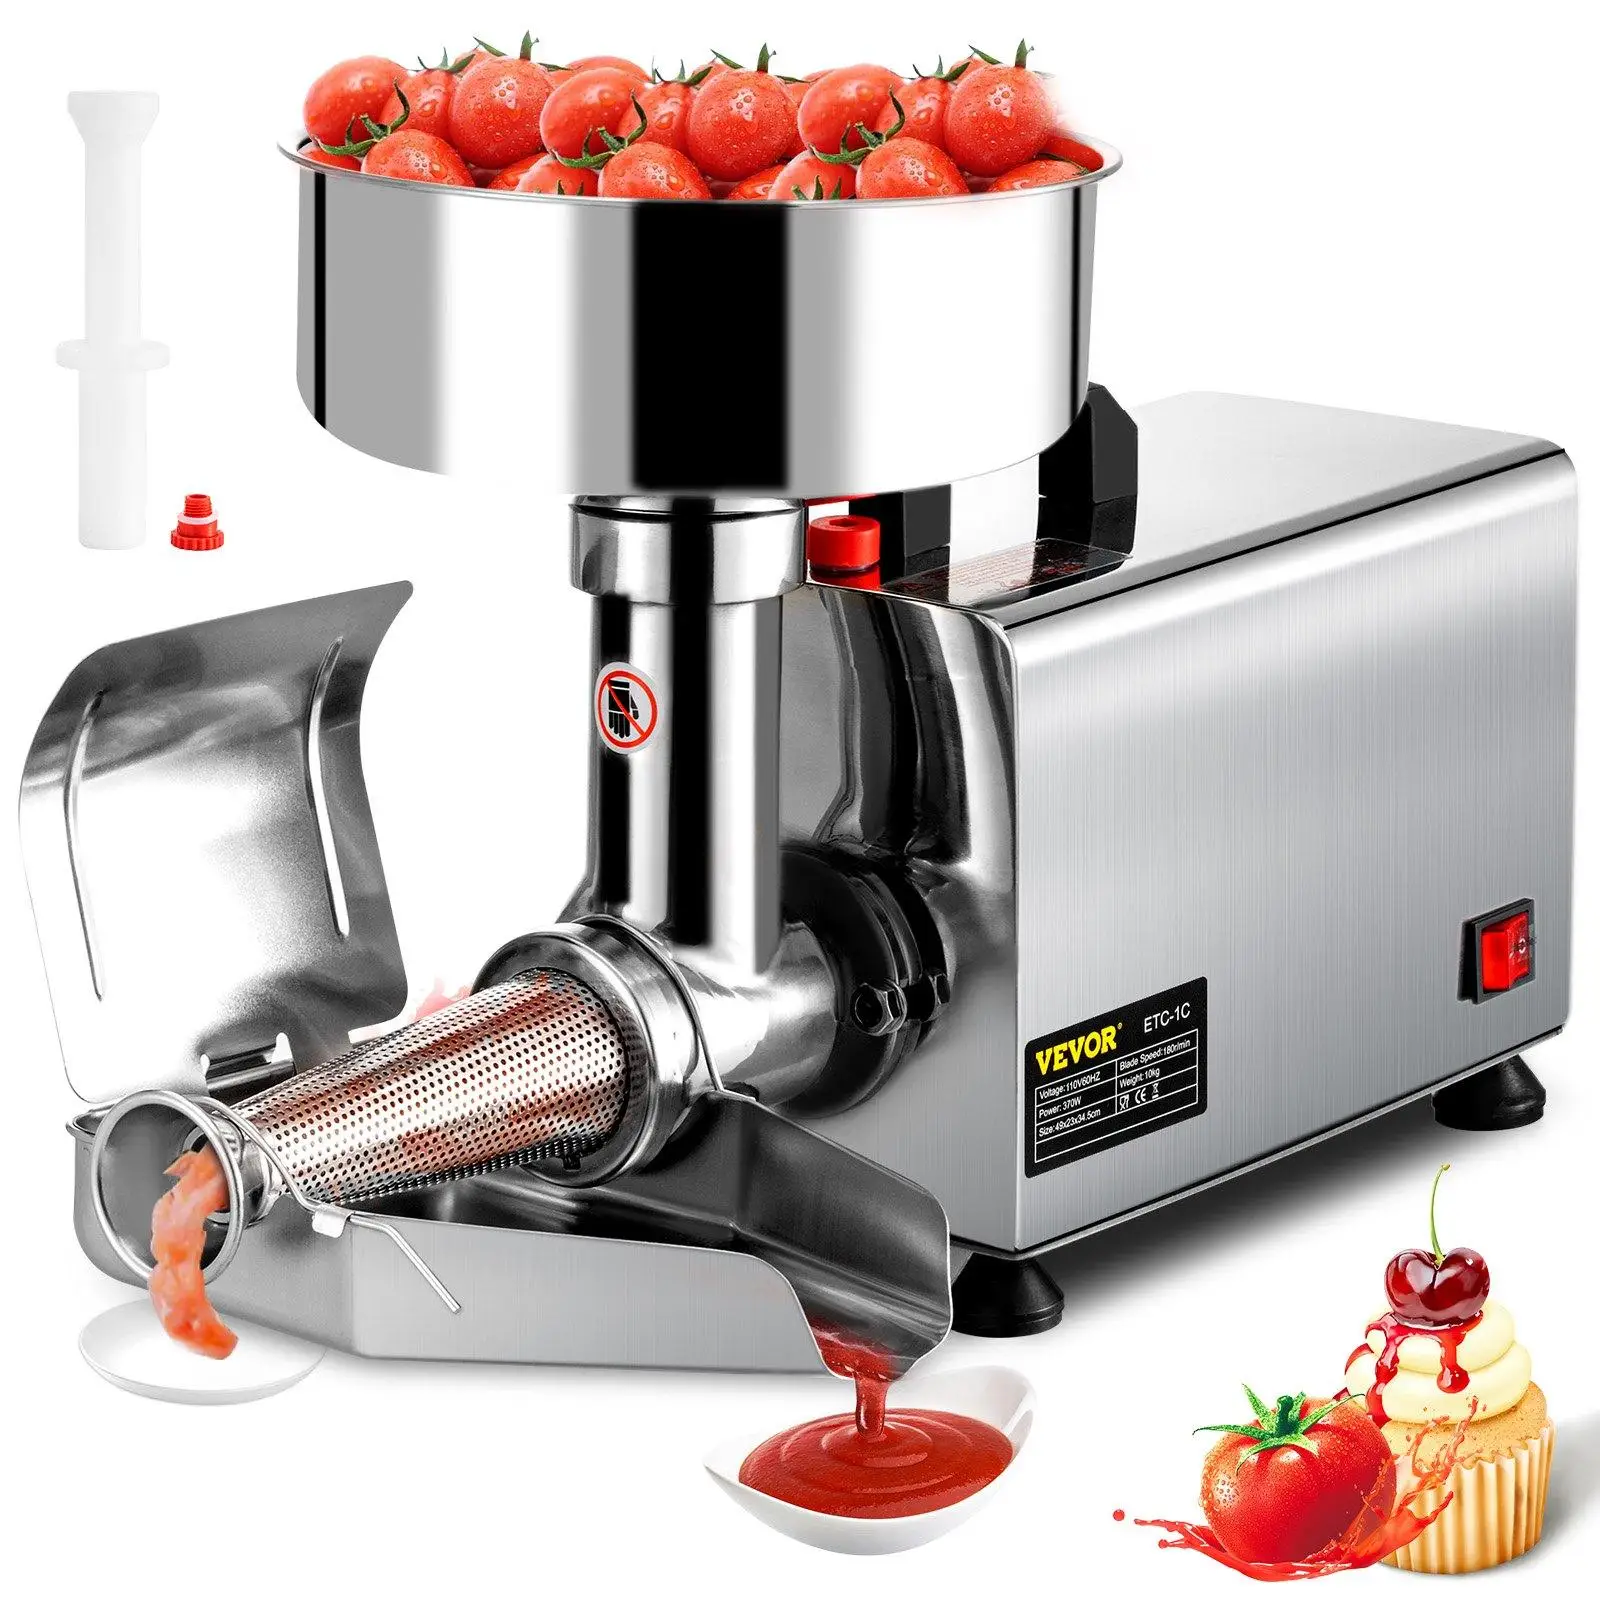 Weston Tomato Strainer, Food Mill/Sauce Maker Review 